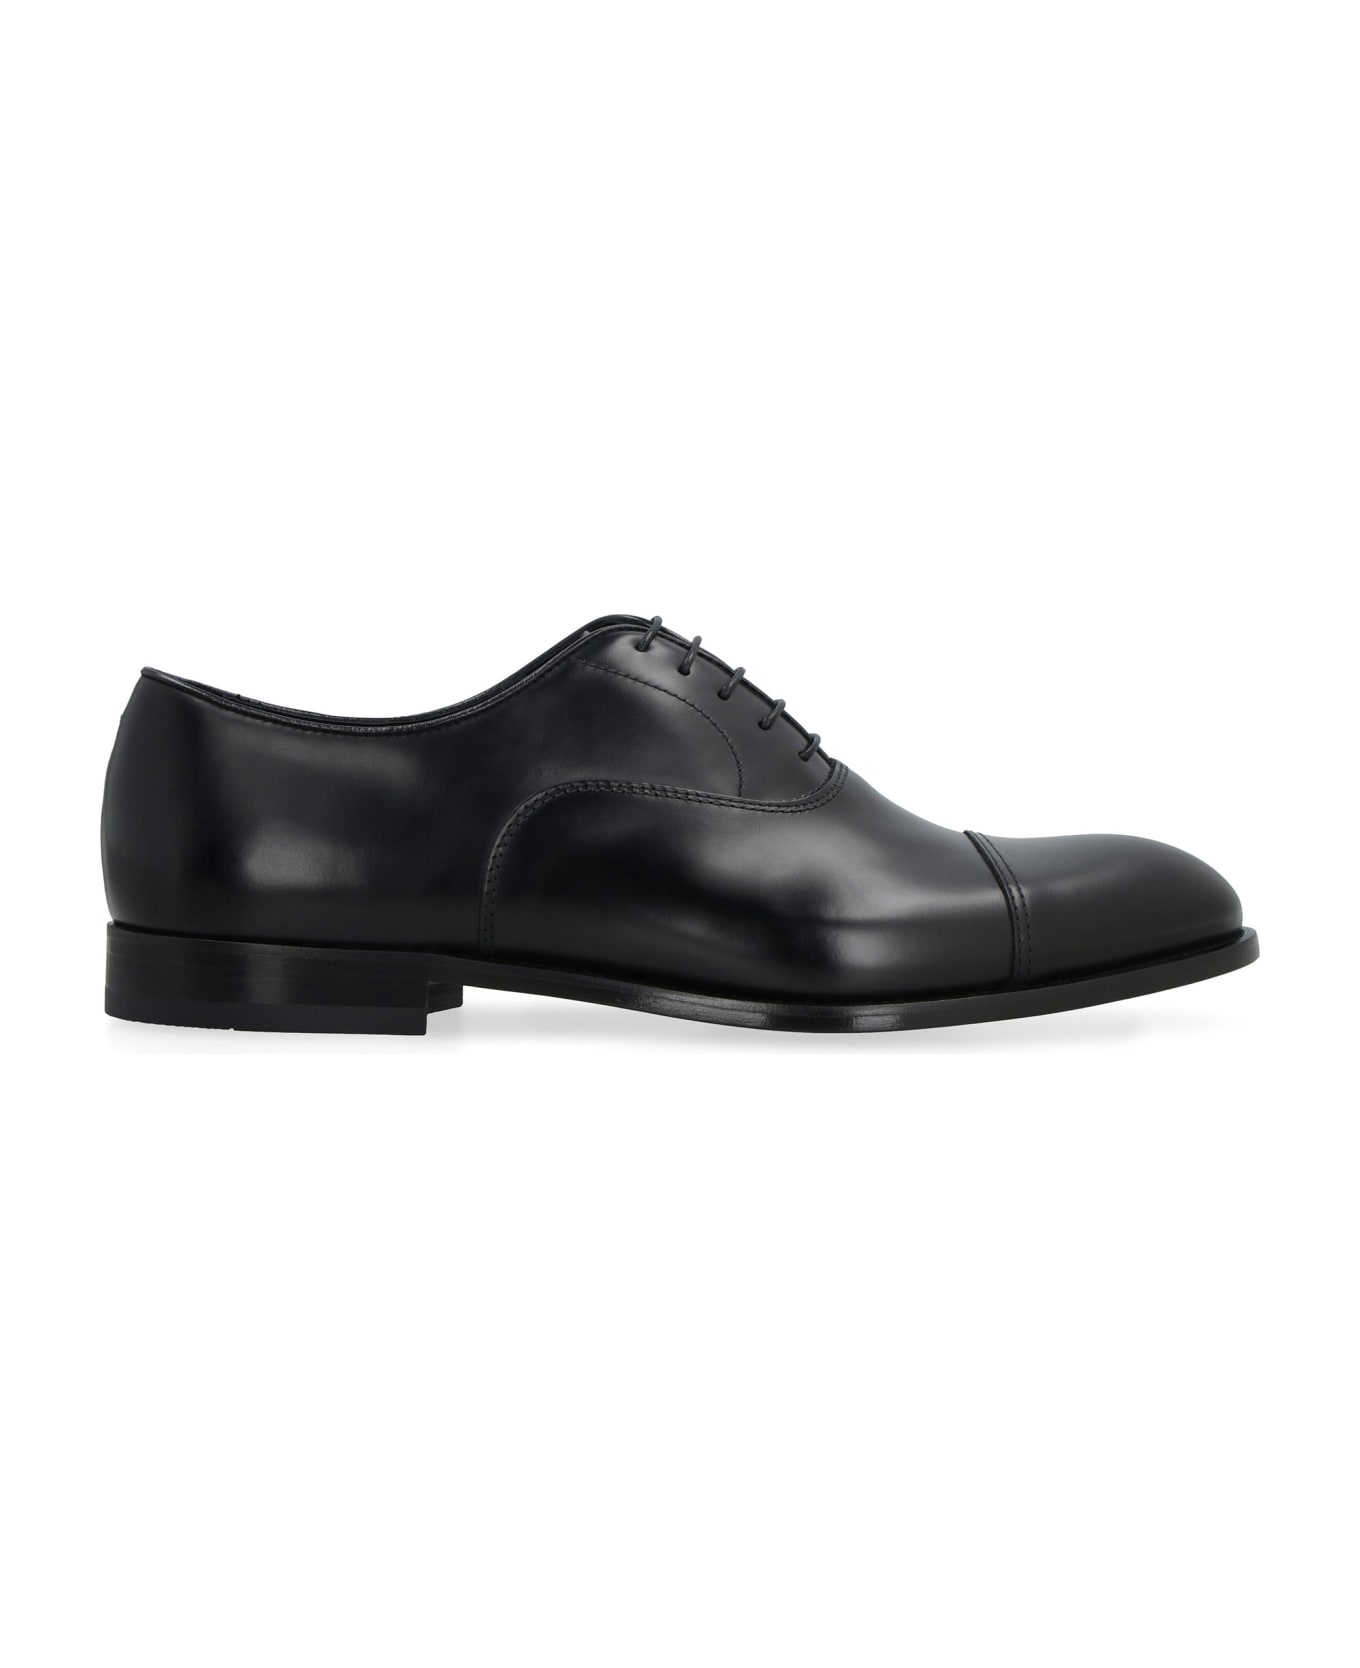 Doucal's Oxford Shoes - black